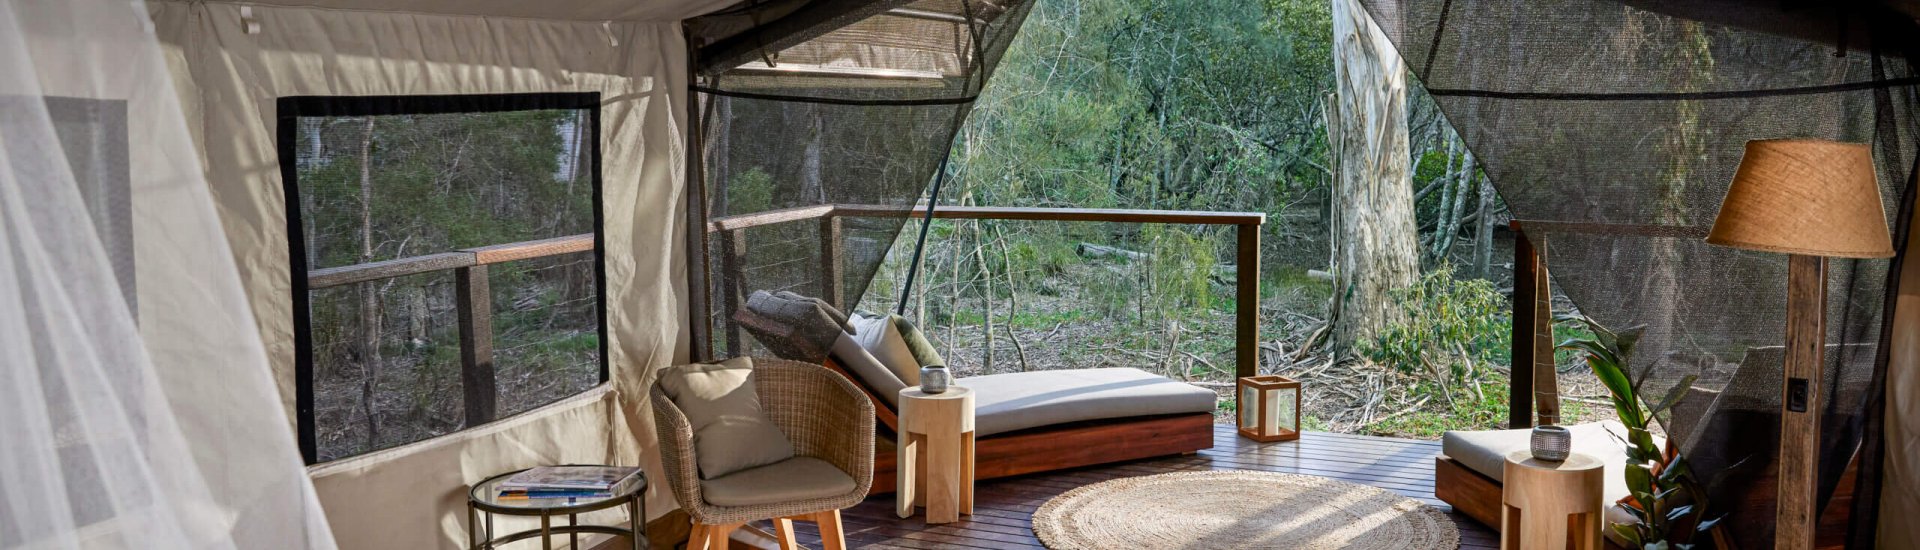 Paperback Camp is one of Australia's top eco-cabins and off-grid escapes